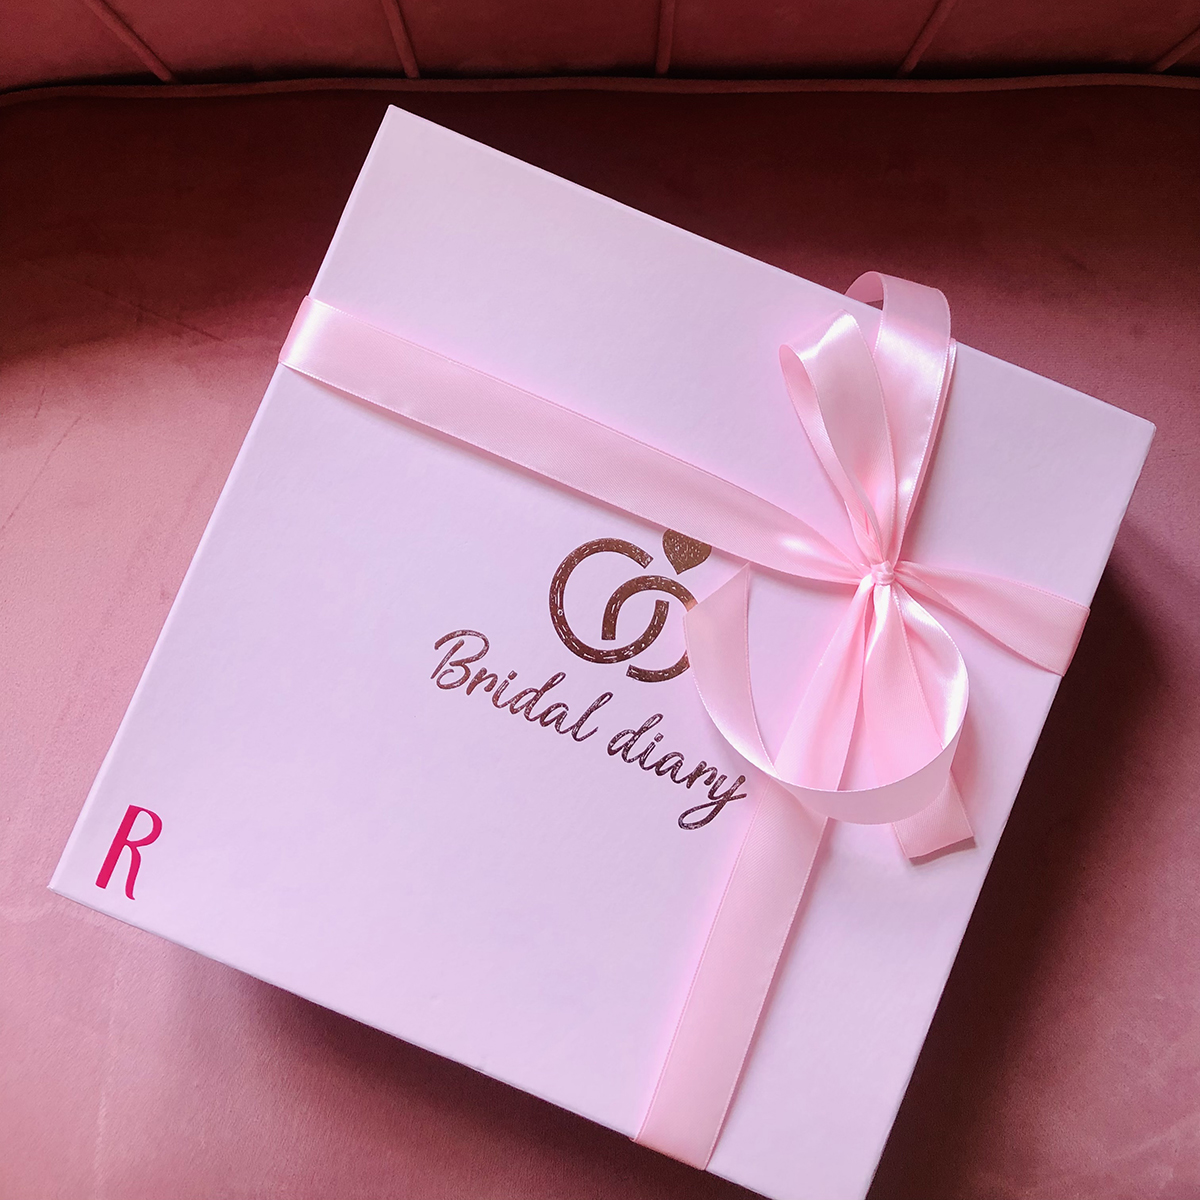 BD – Letter Gift Box Pink